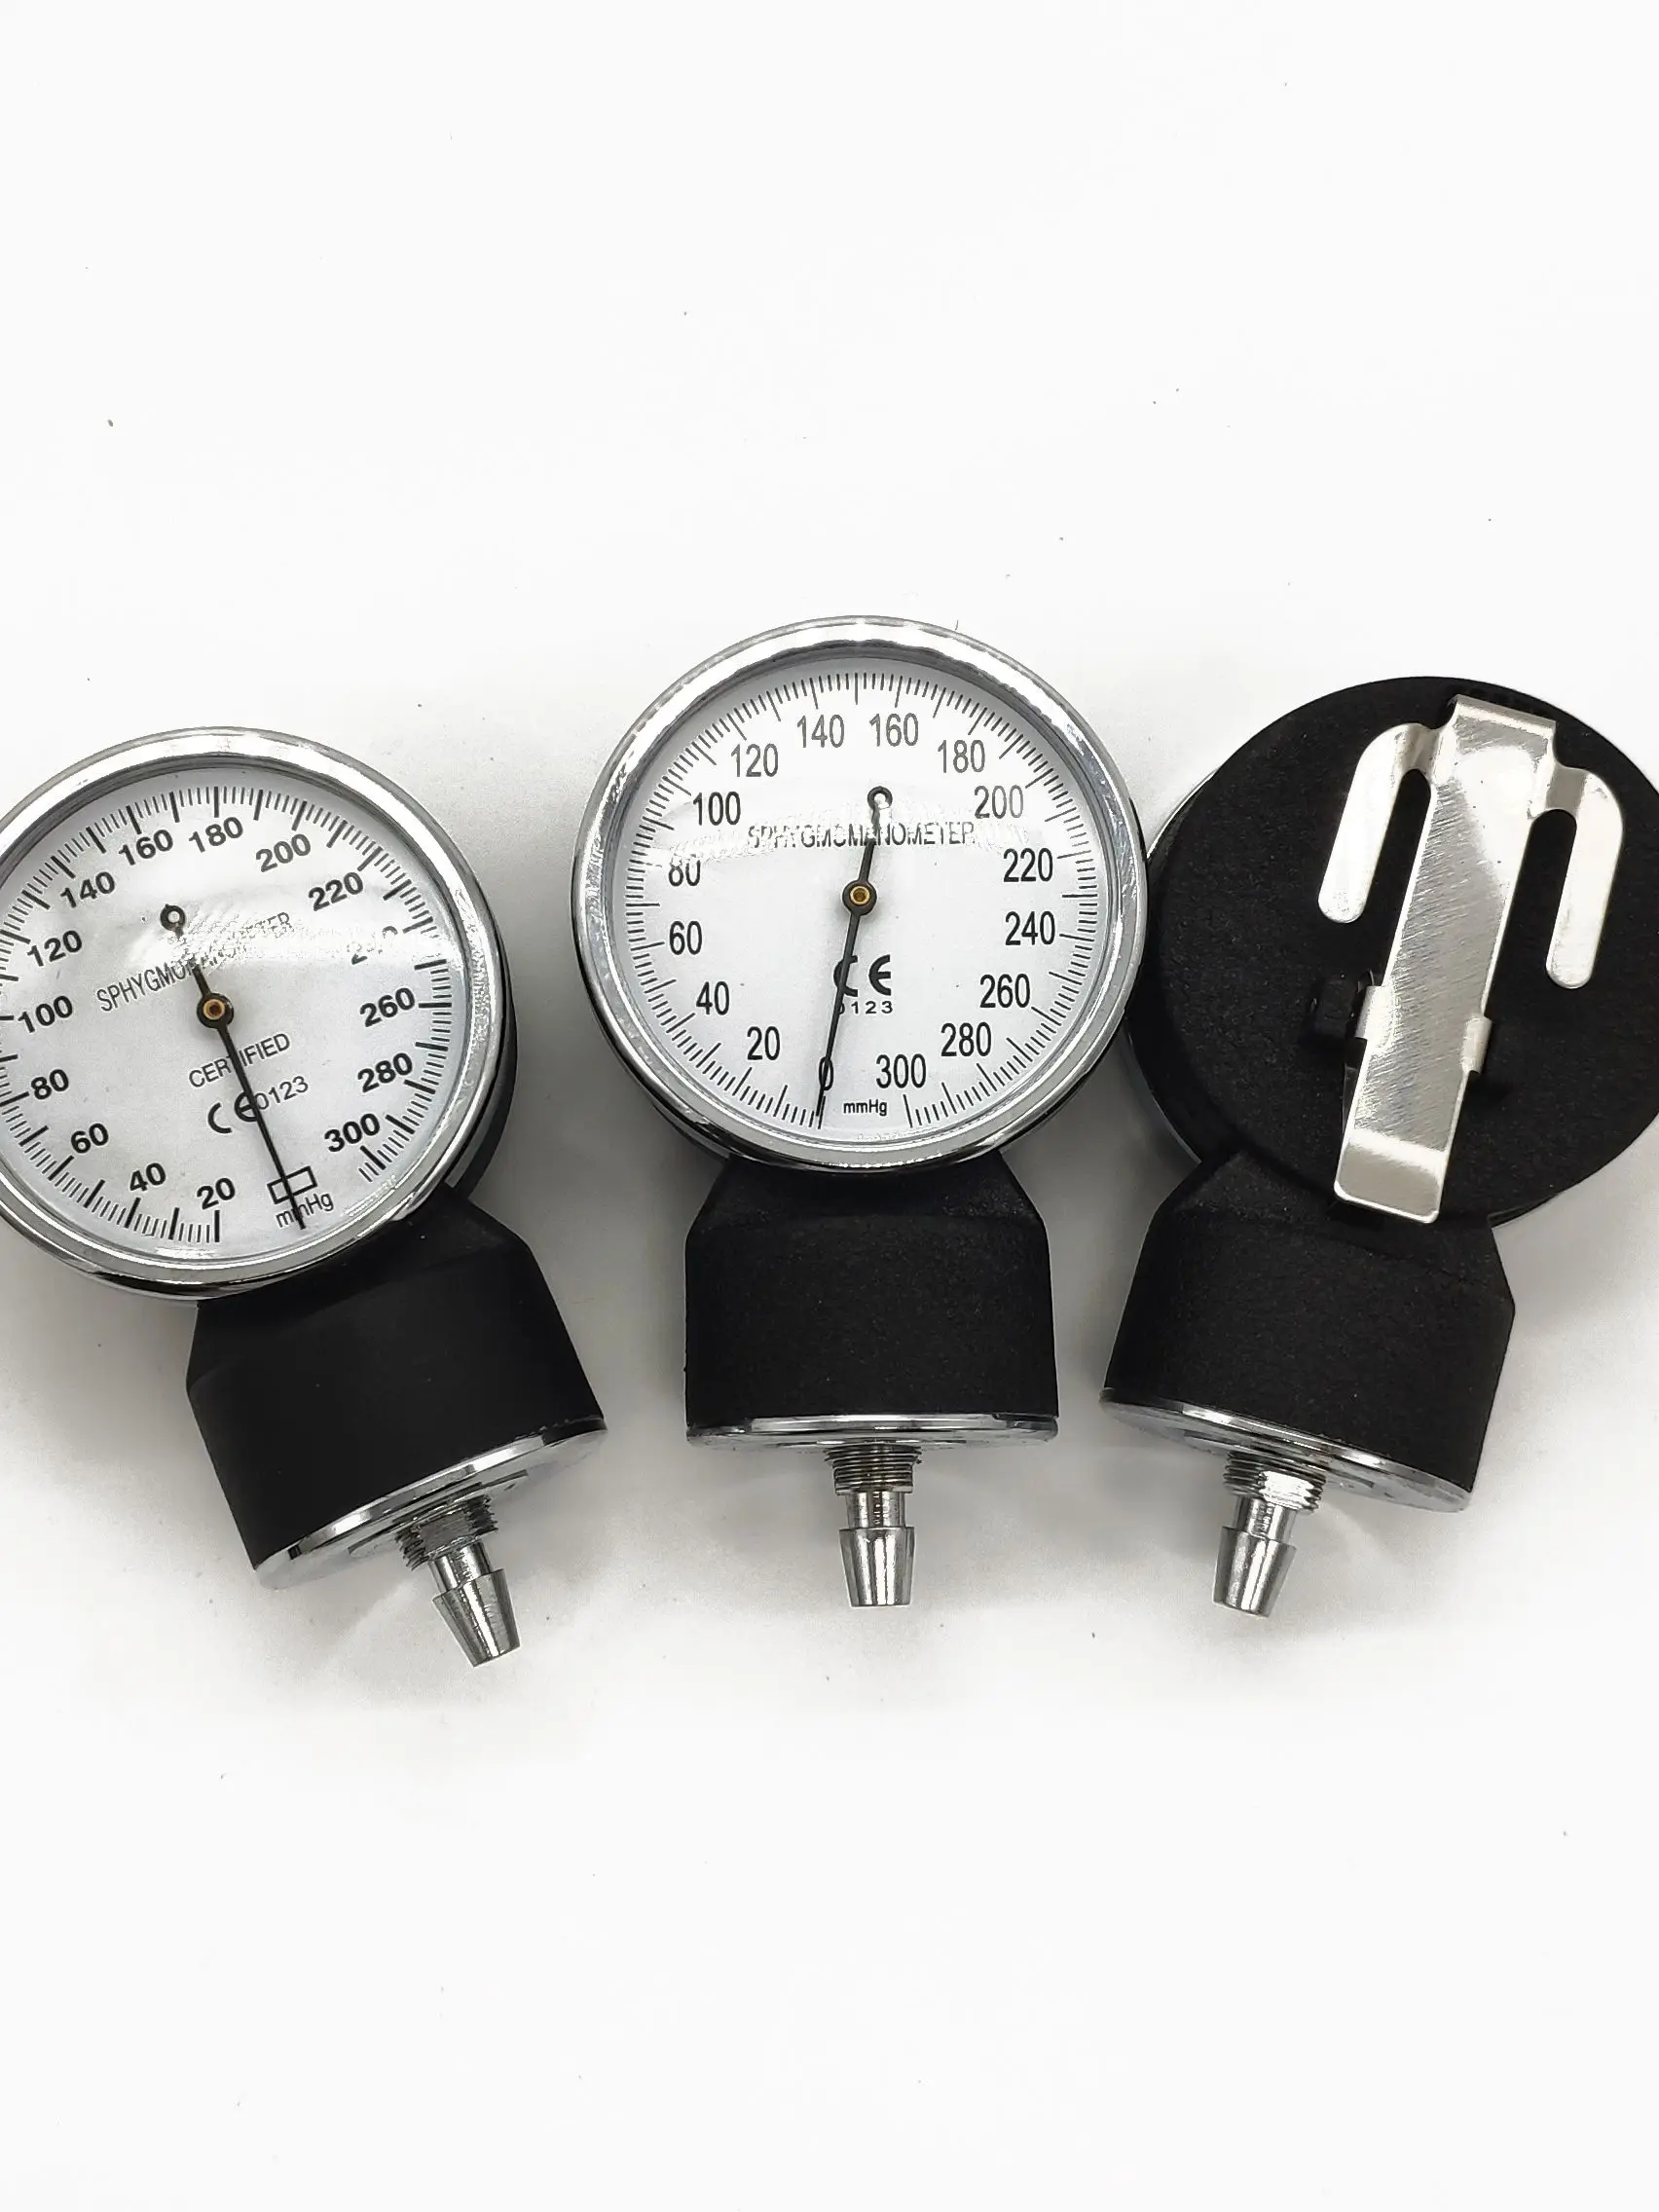 

Manual Blood Pressure Monitor Gauge Meter Bulb Accessory for Medical BP Cuff Arm Aneroid Sphygmomanometer Patient Monitor